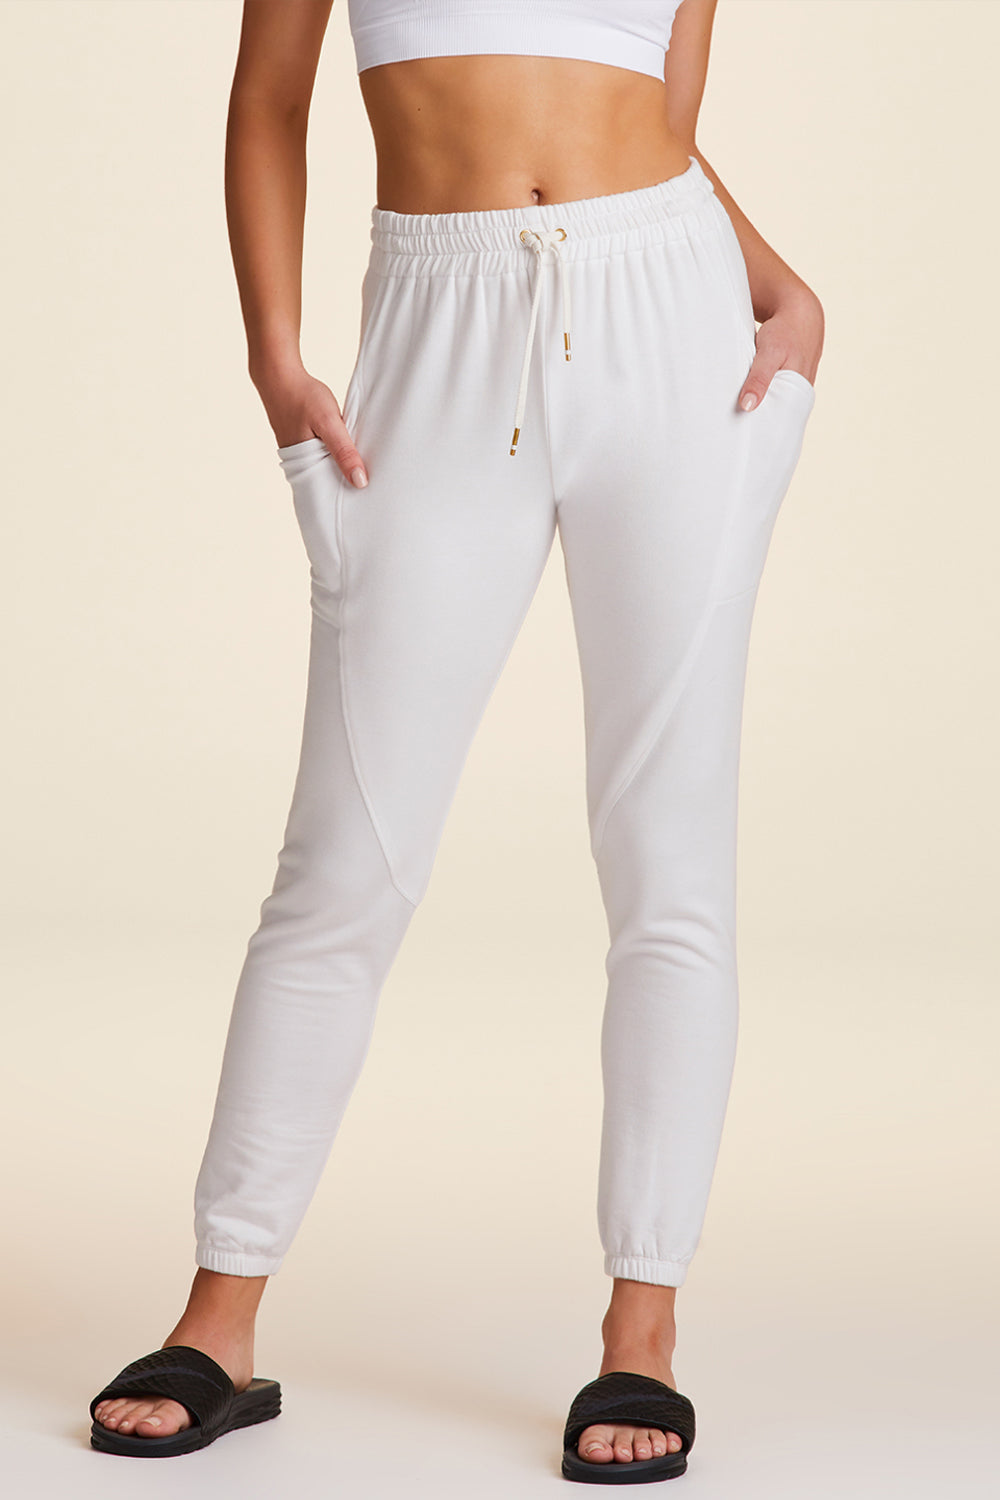 Front view of Alala Luxury Women's Athleisure super crewneck fleece sweatpant in white with pockets